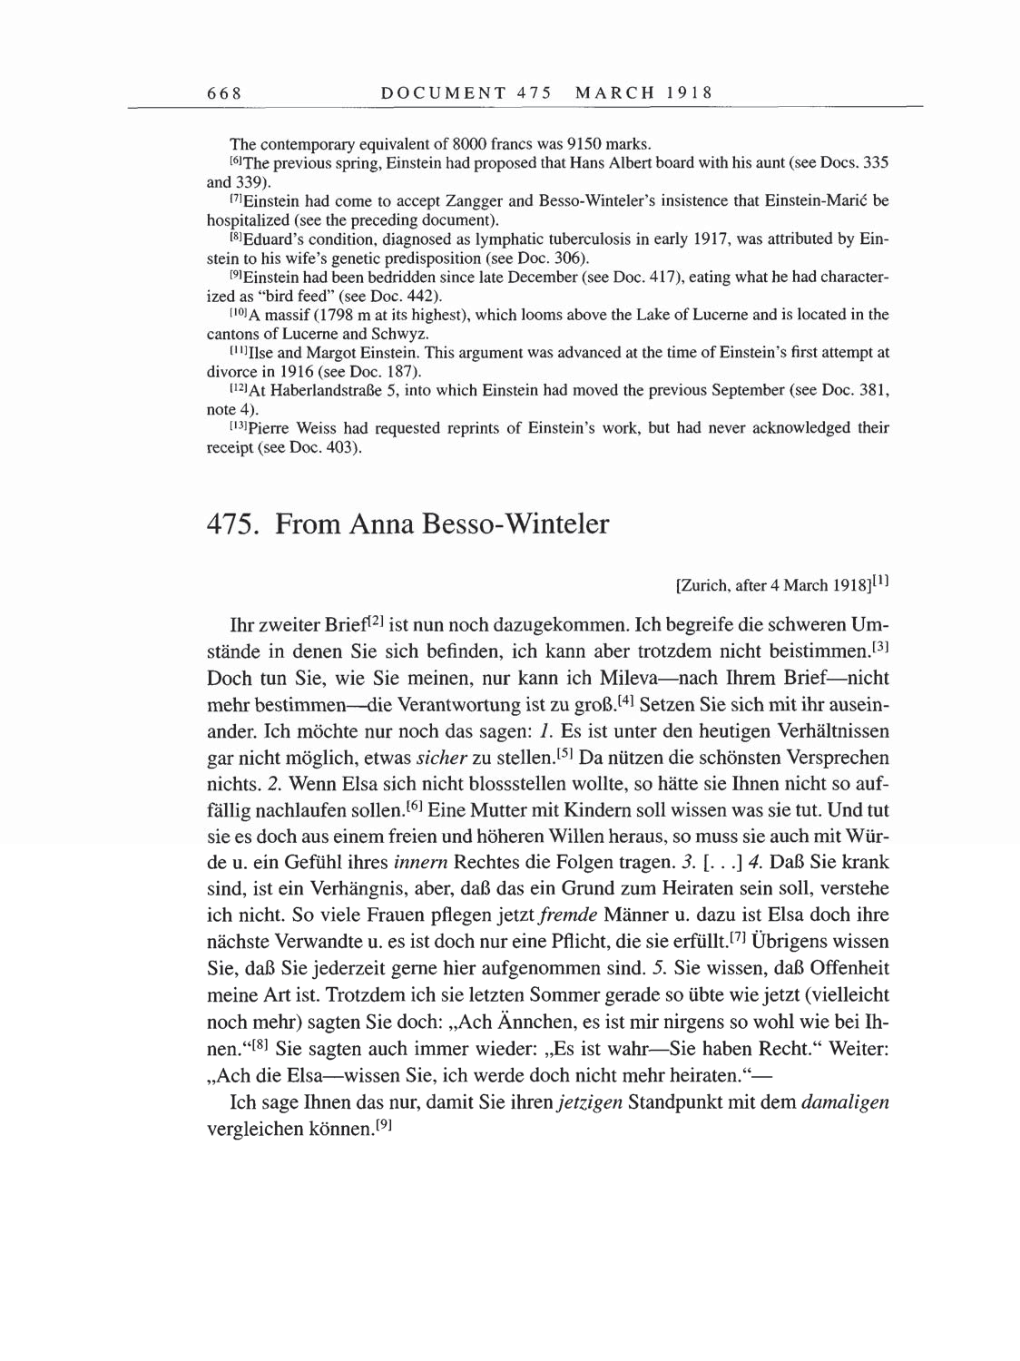 Volume 8, Part B: The Berlin Years: Correspondence 1918 page 668